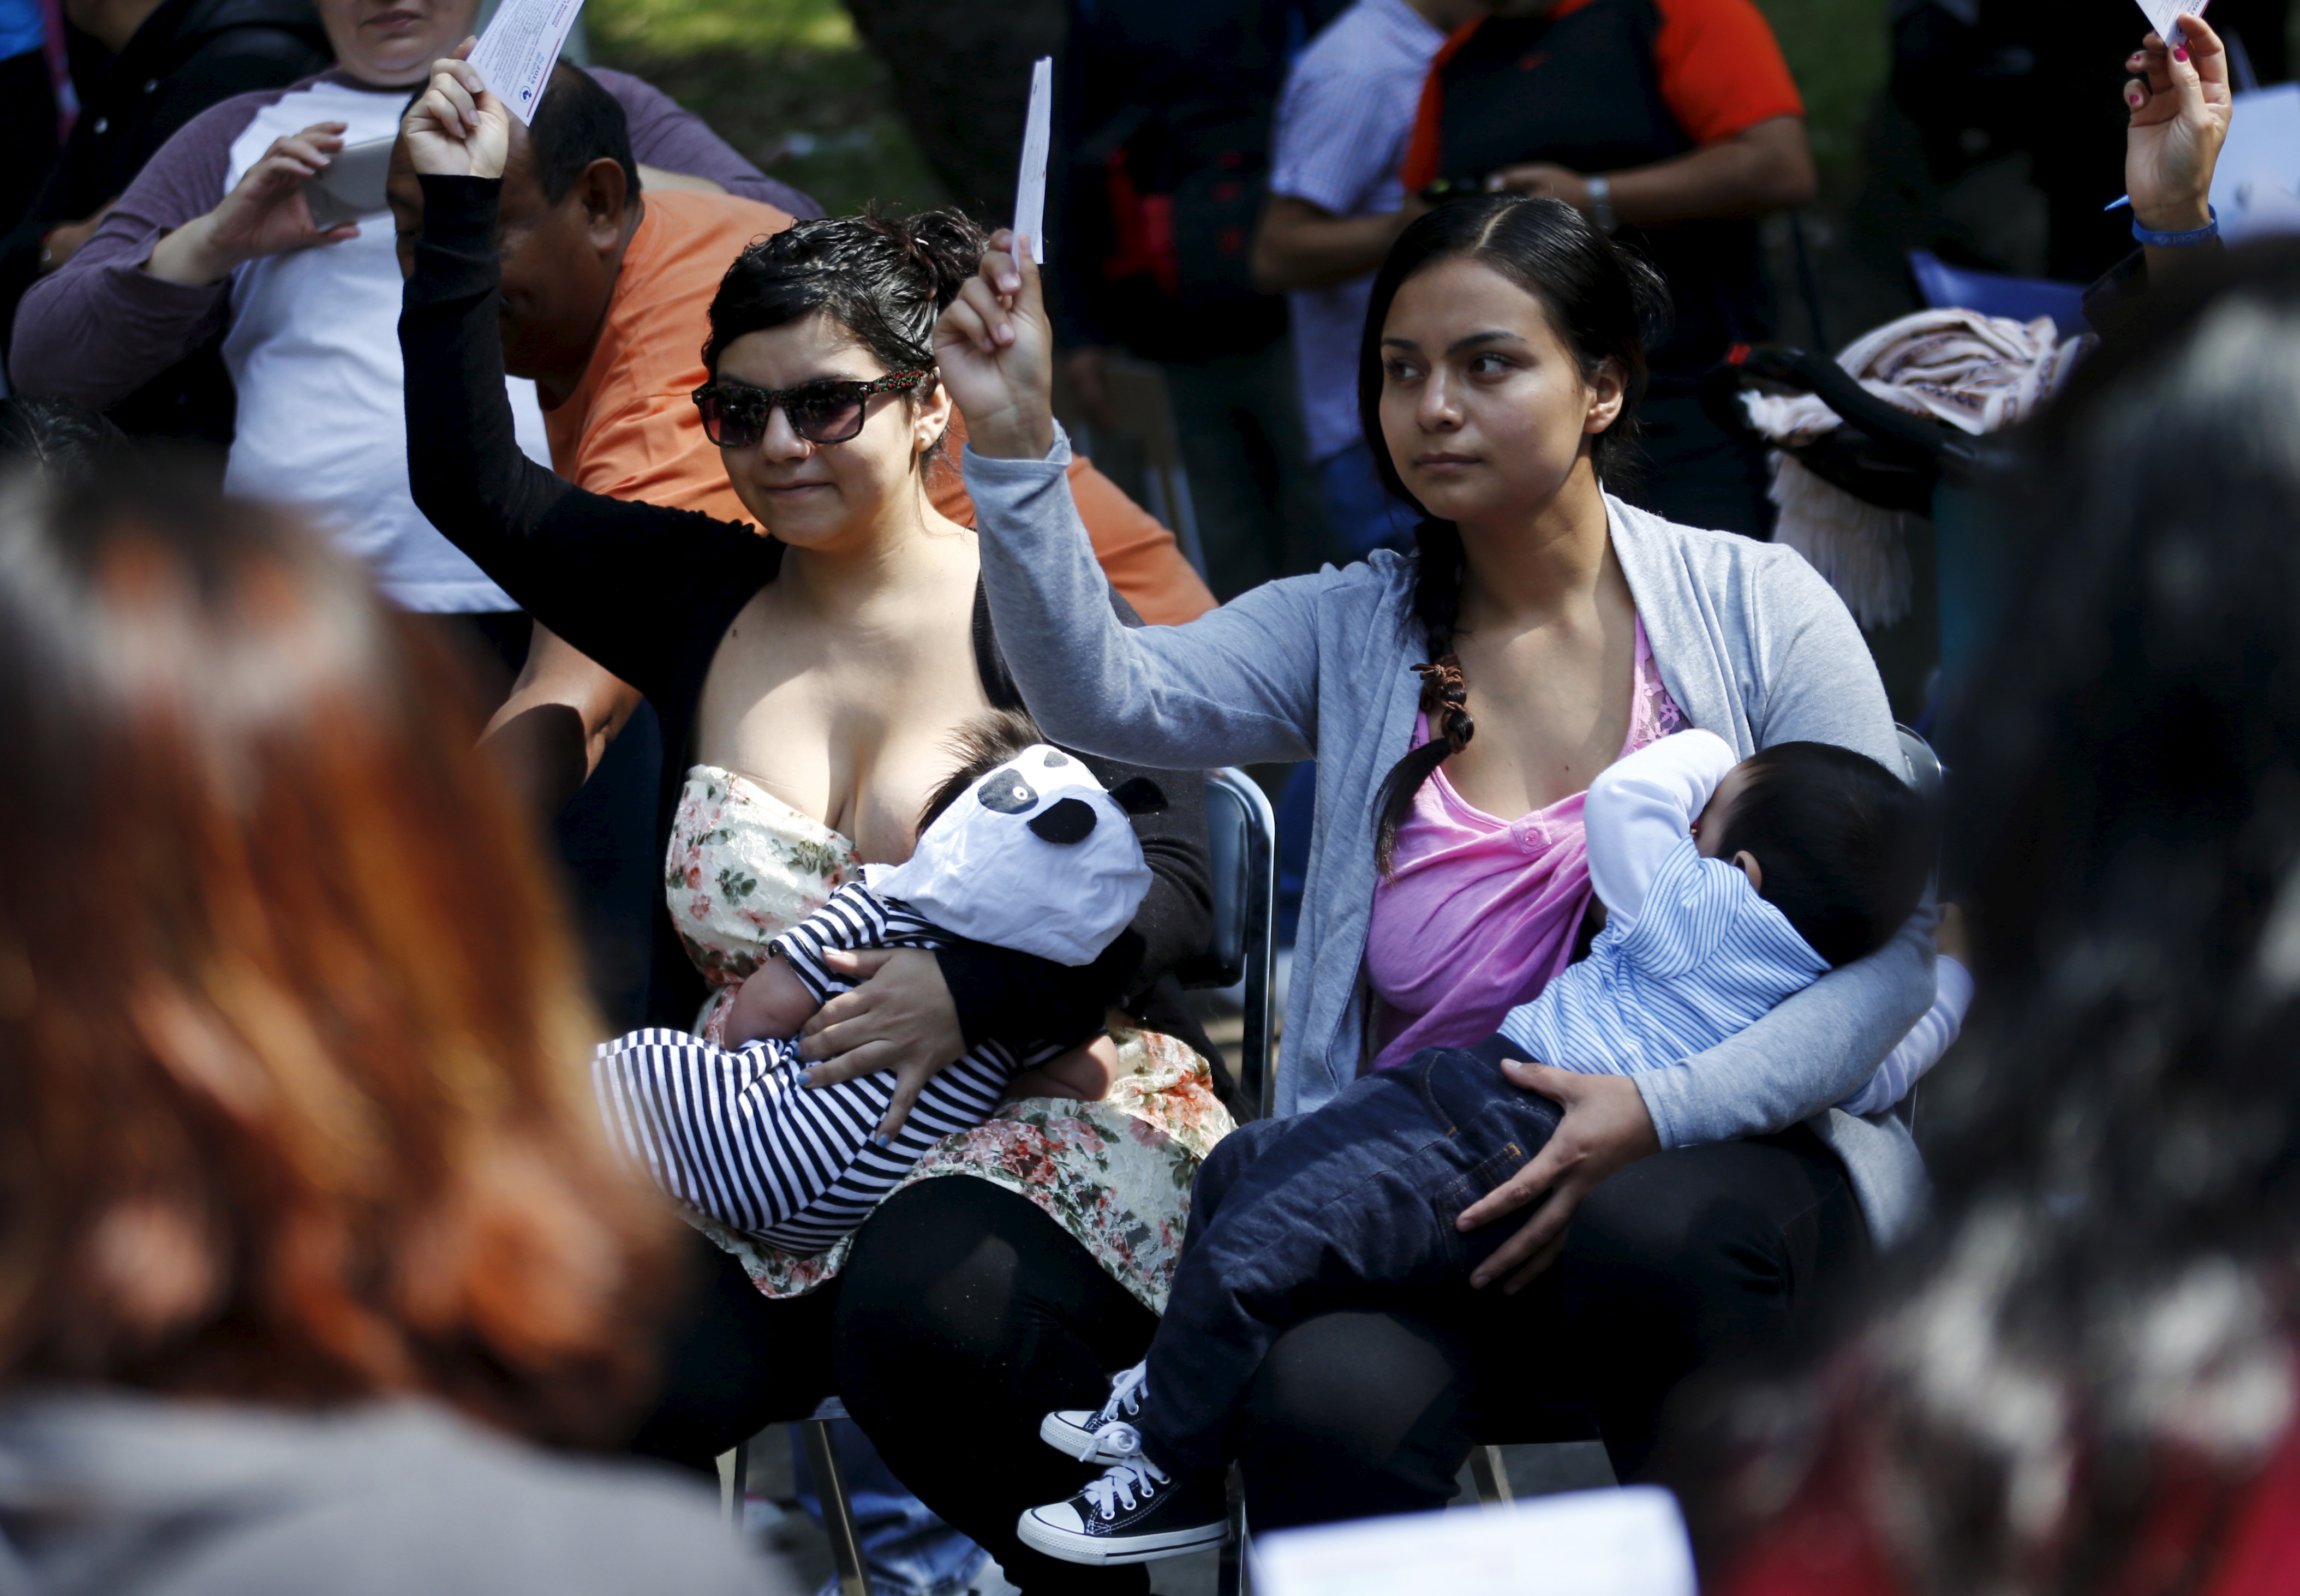 Women breastfeed babies during the annual World Breastfeeding Week to promote feeding children with natural milk in Mexico City on Aug. 1, 2015. (Henry Romero—Reuters)